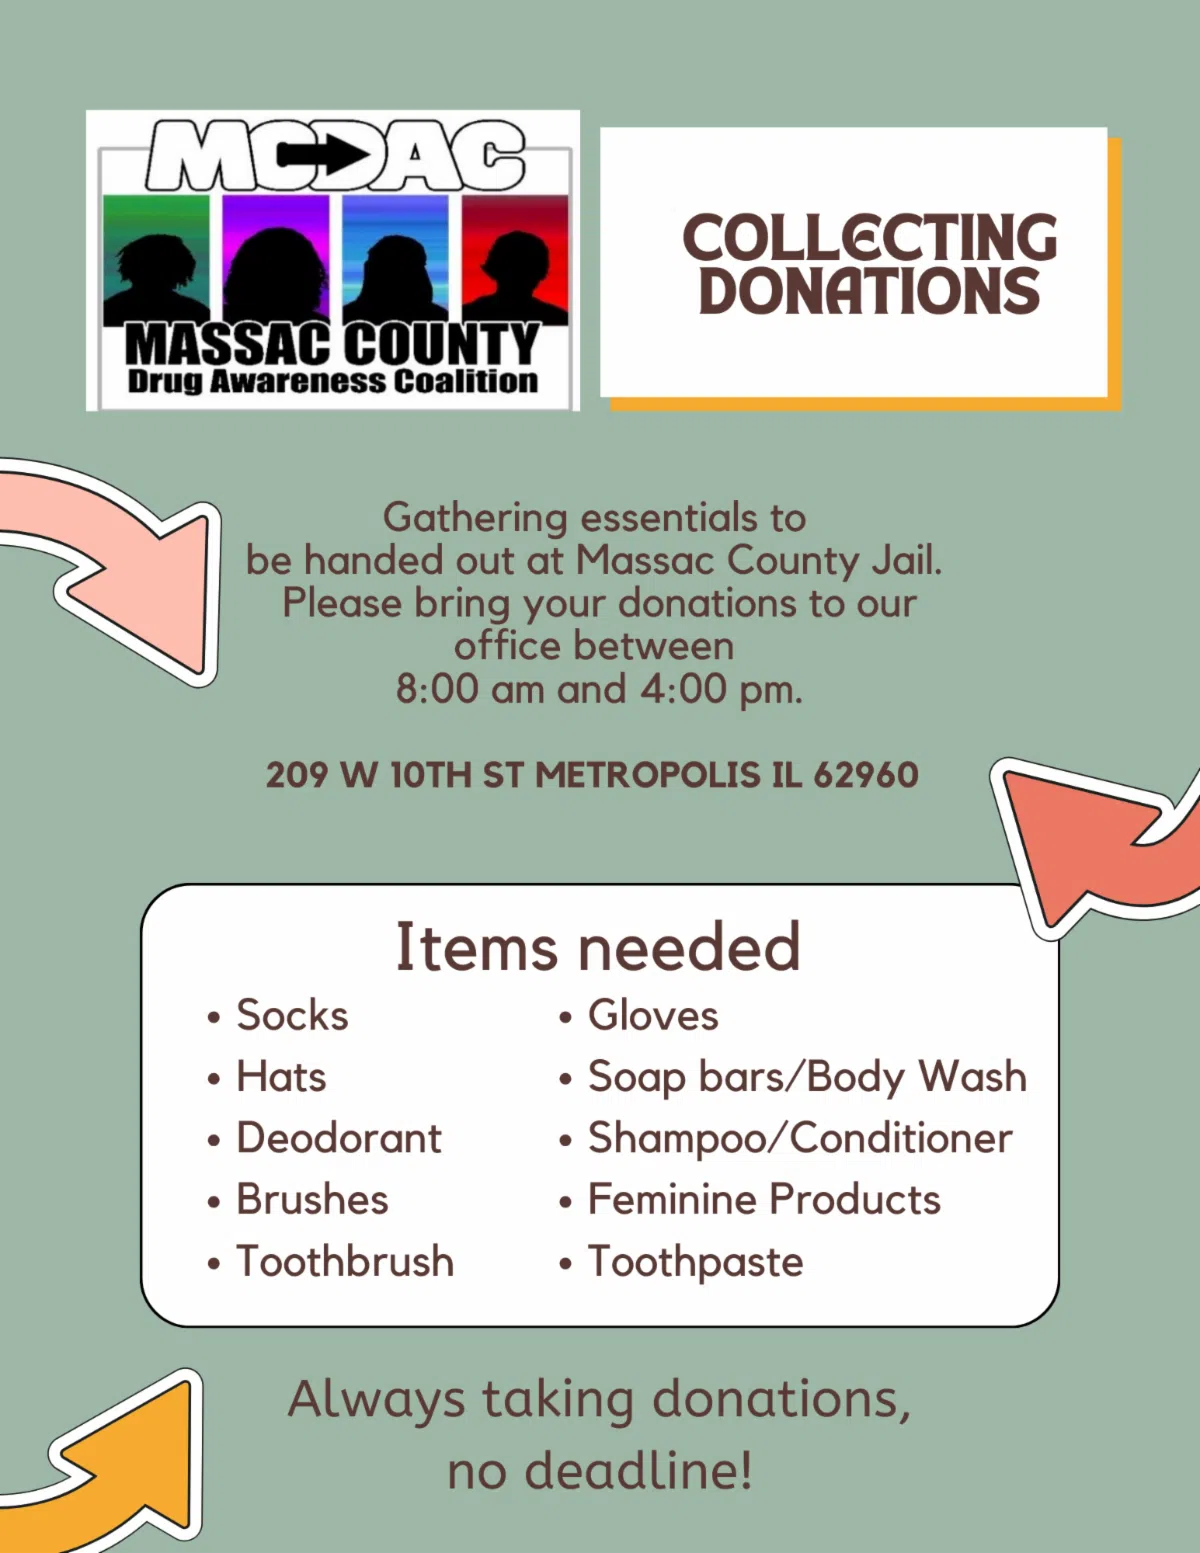 Massac County Drug Awareness Coalition Is Collecting Donations